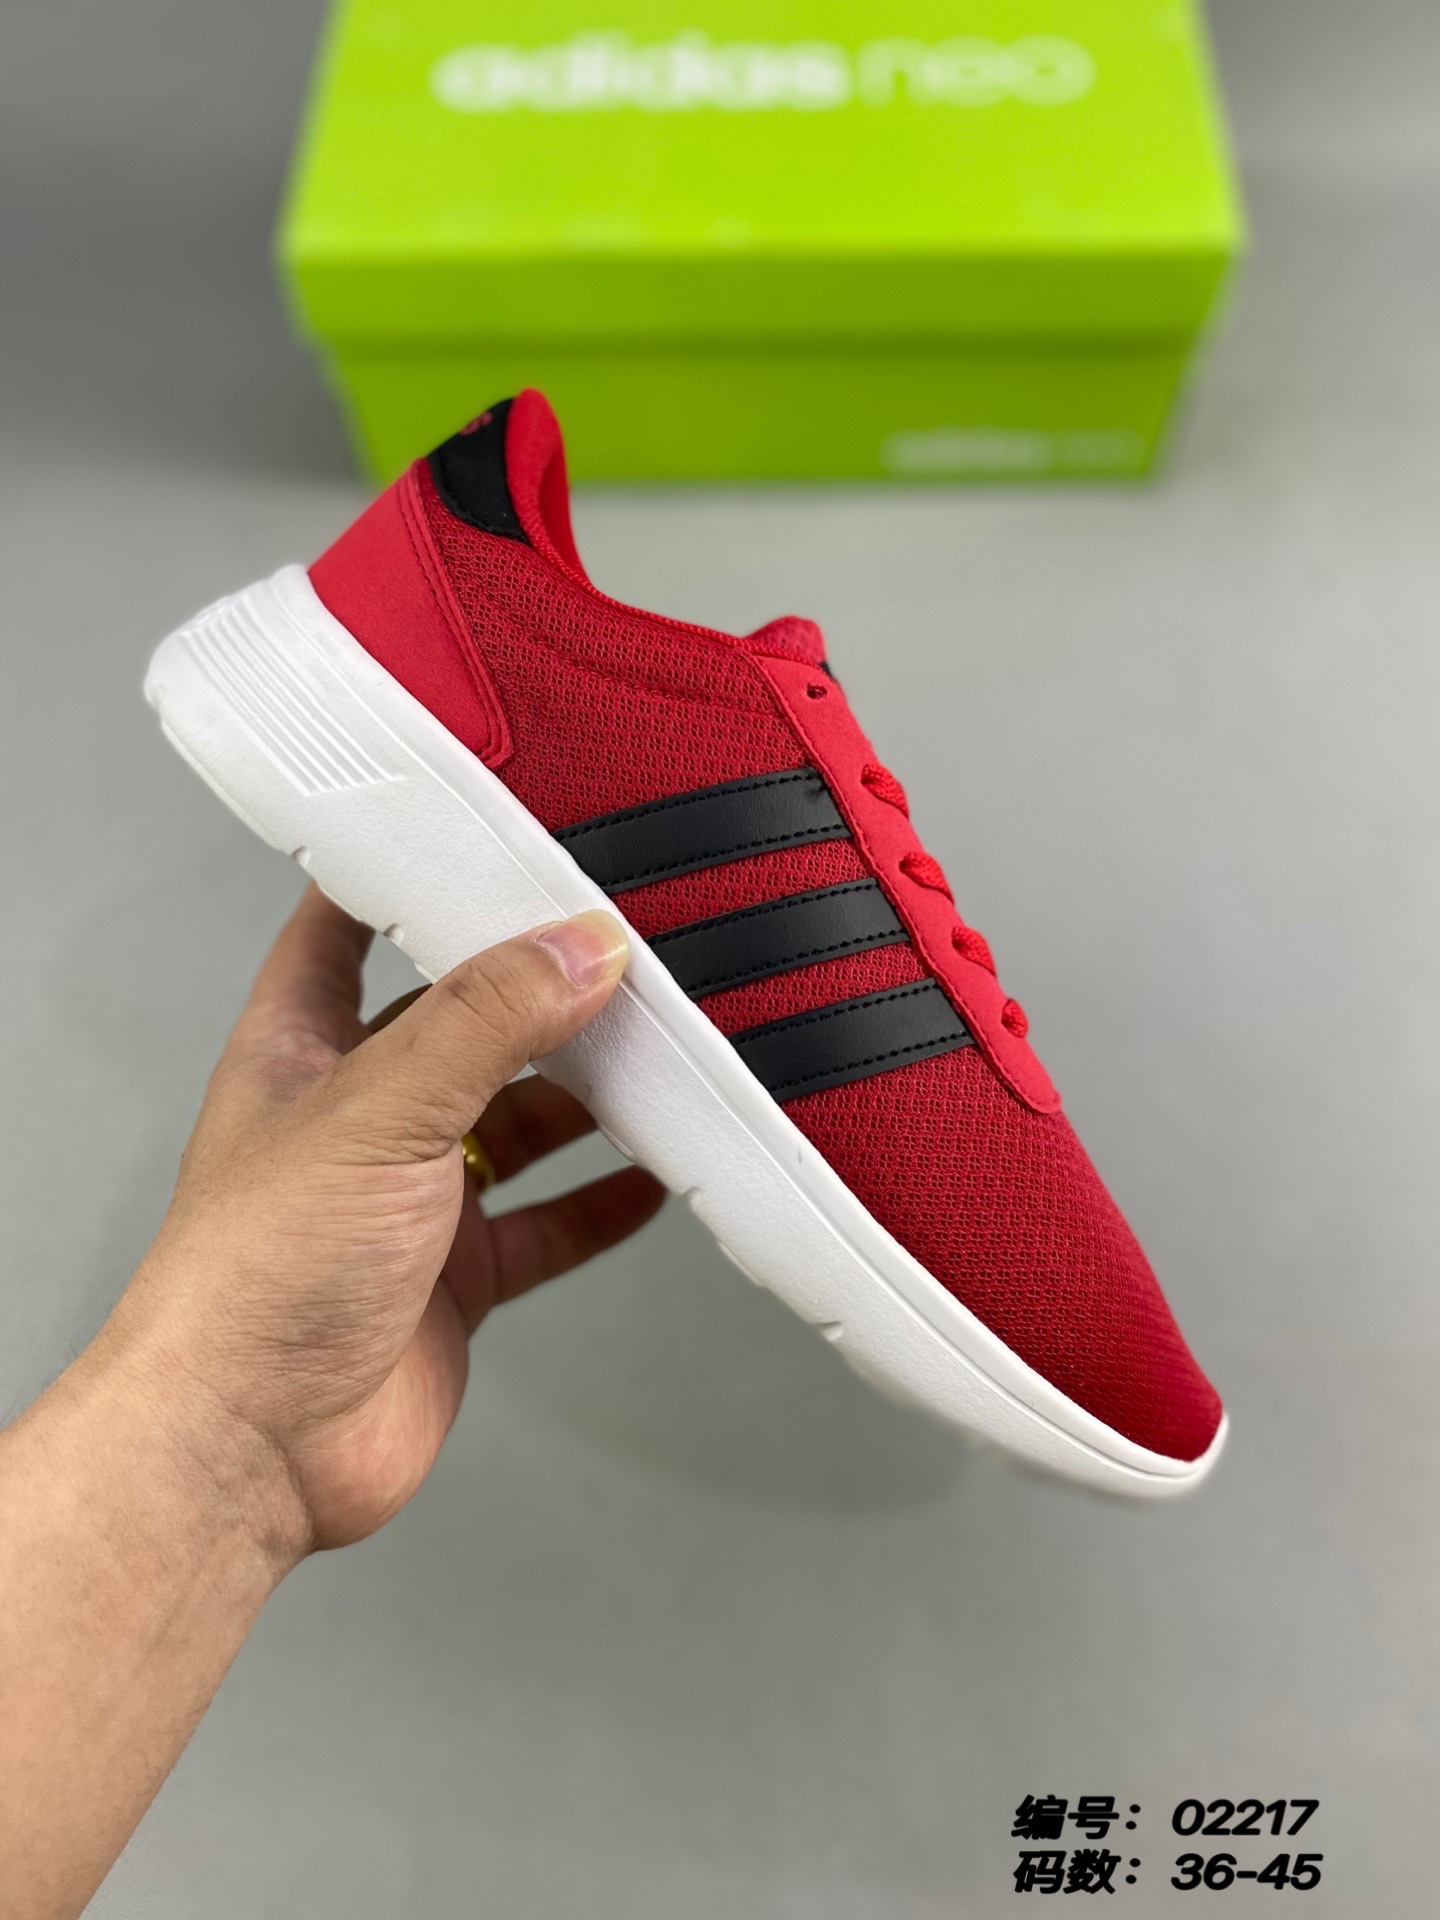 Adidas Neo Legal 100% Original Authentic Stock Arrival Flagship Running Shoes Wear-resistant Summer Trend Leading Buffer Leisure | Lazada PH